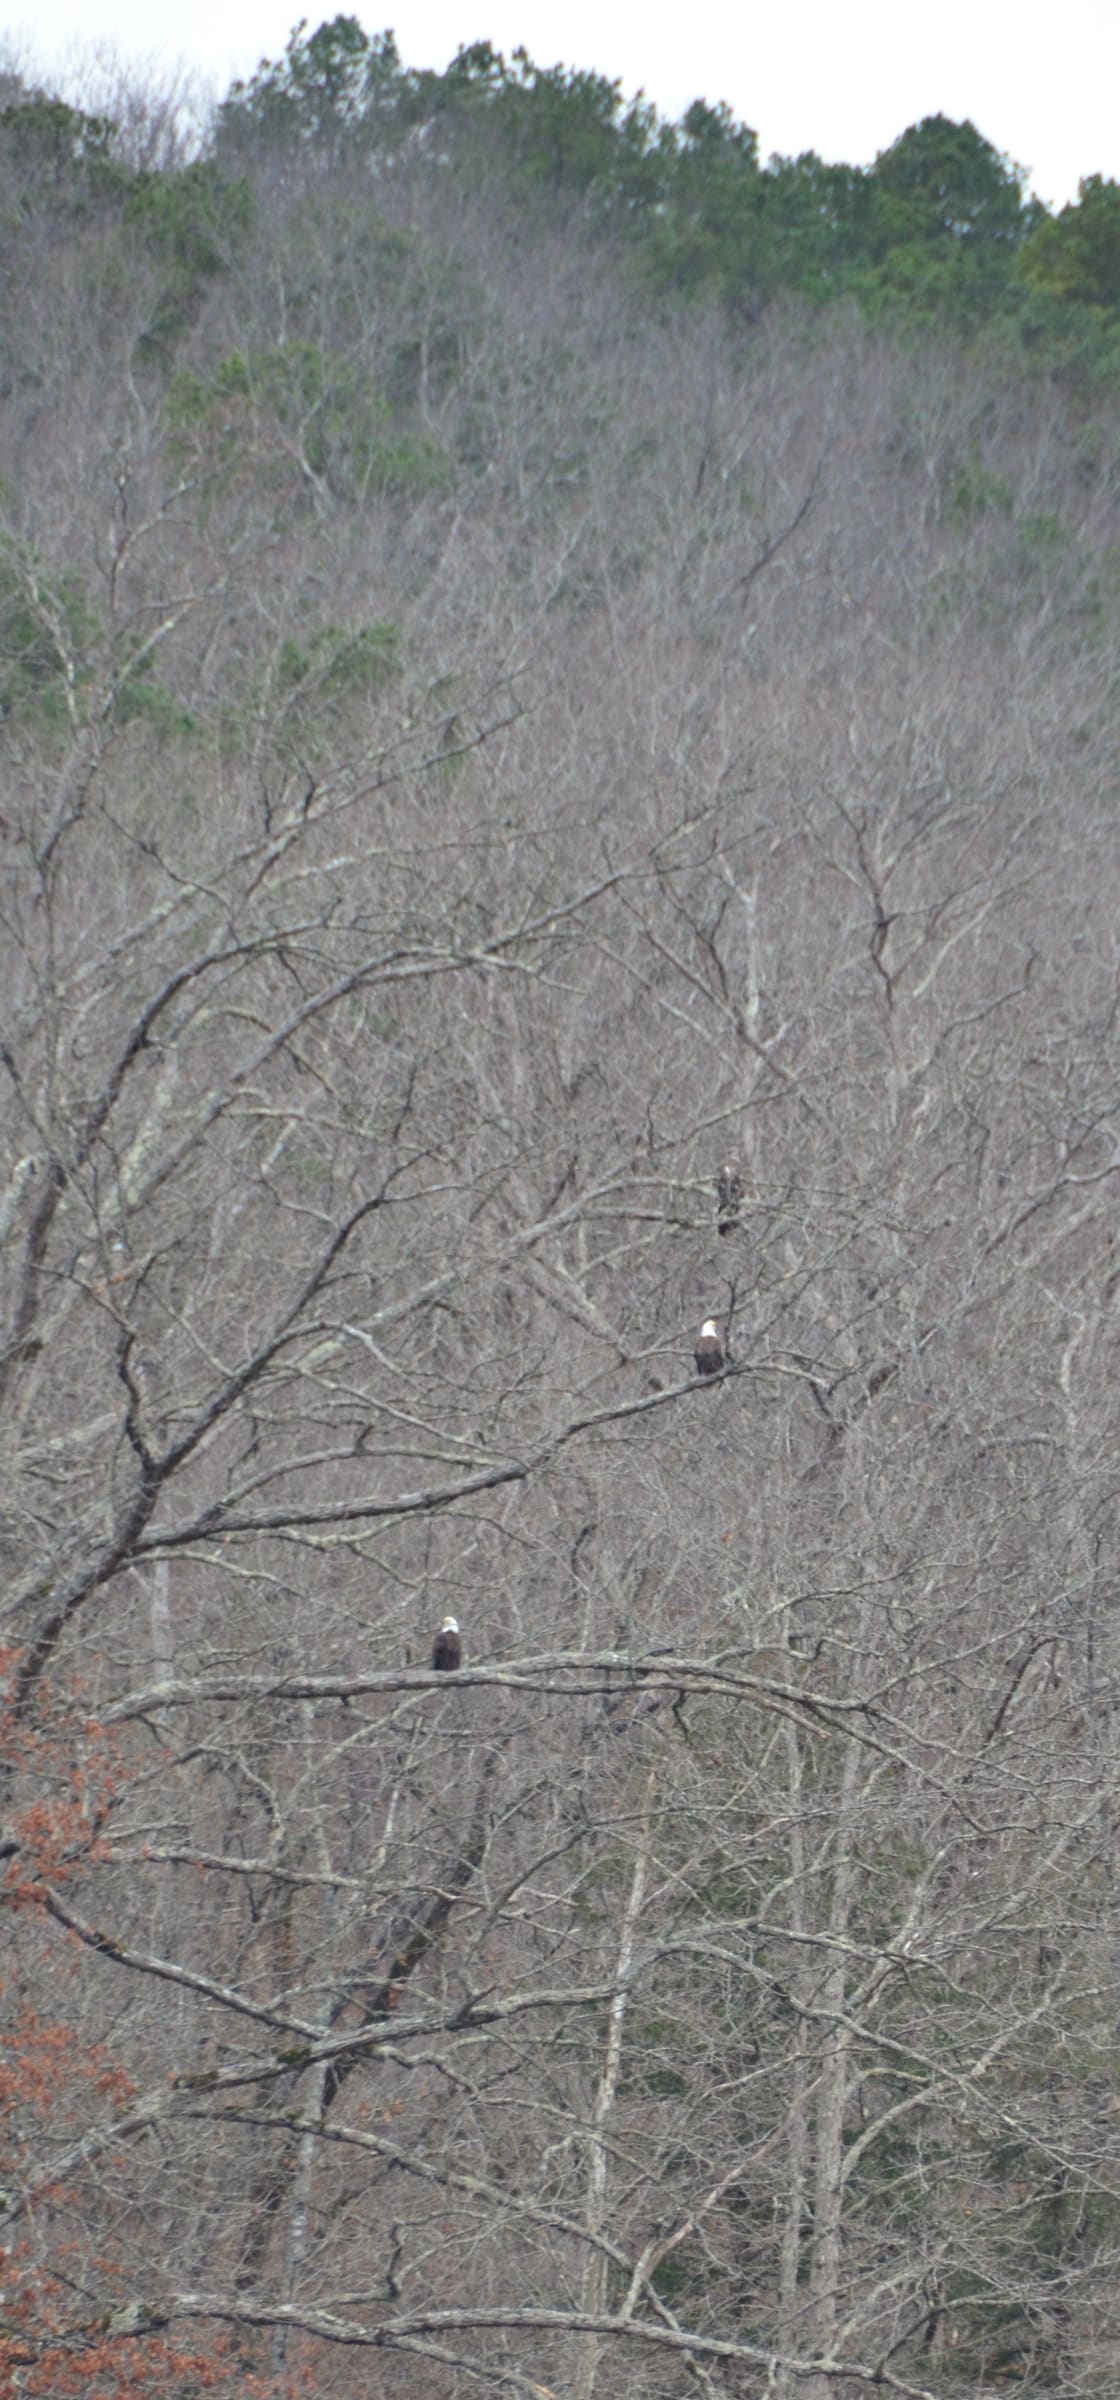 We have a mated pair of eagles living in the area. They have two immature offspring also living with them. 